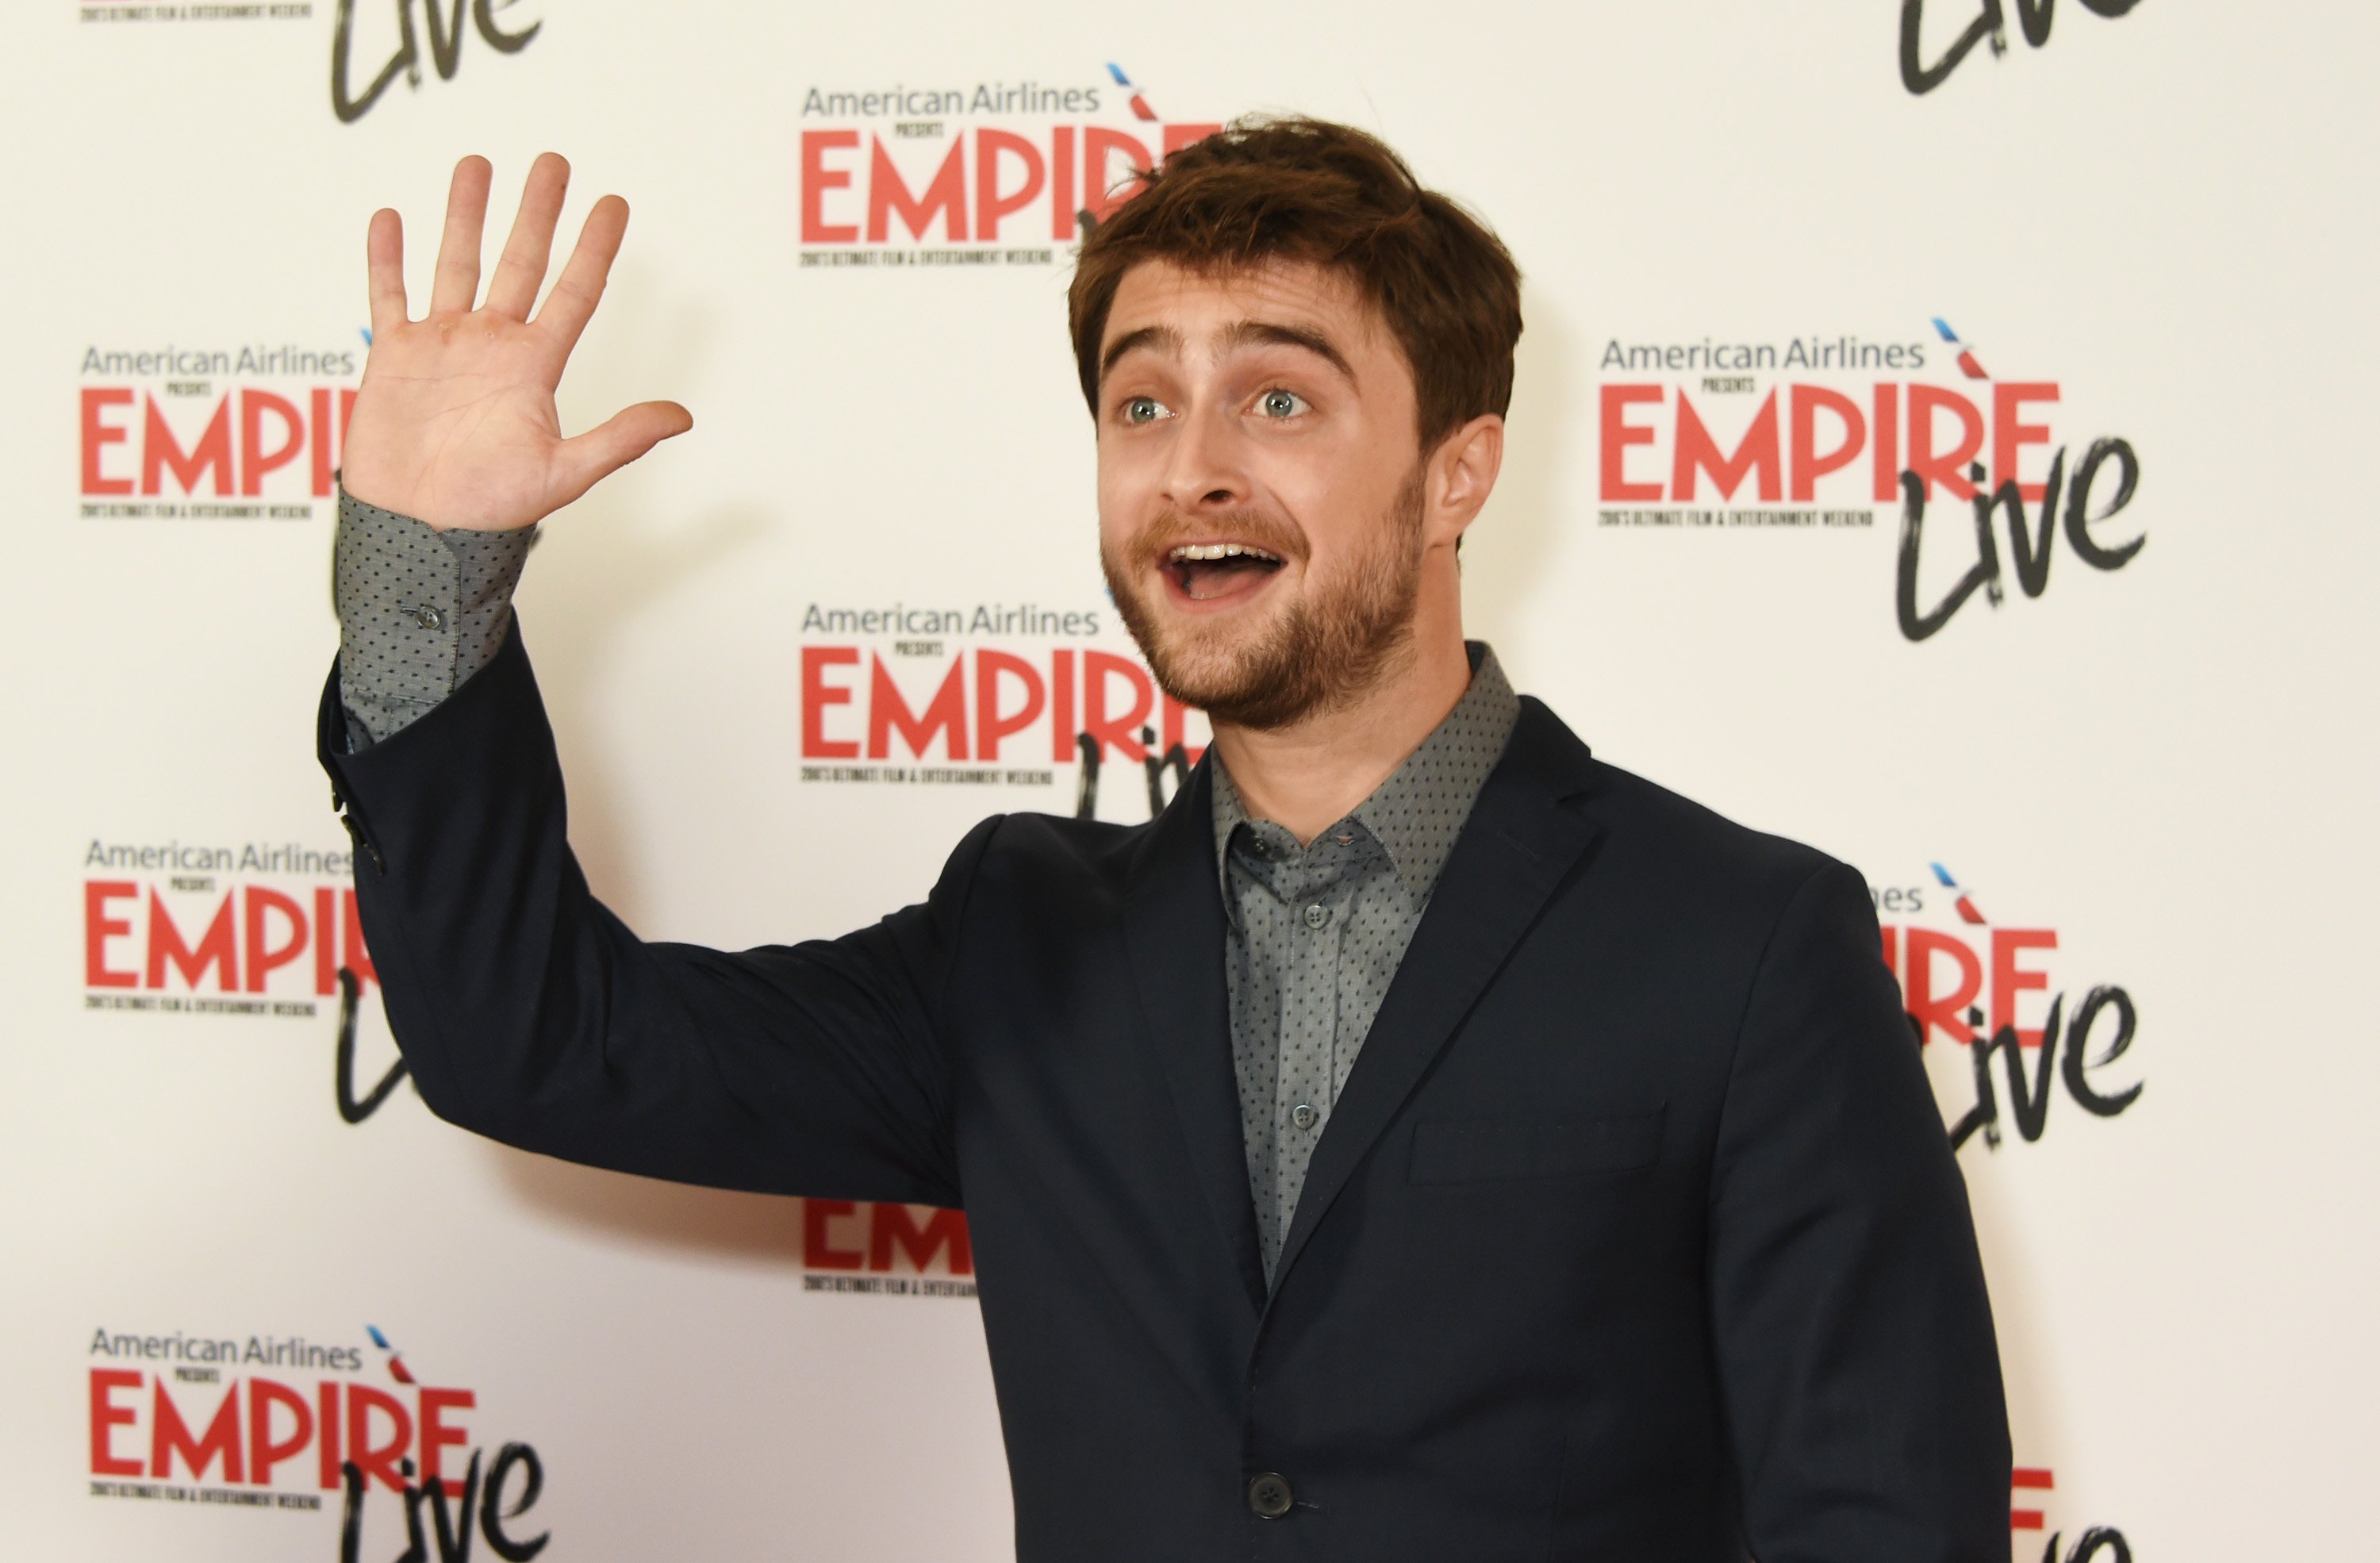 Daniel Radcliffe at the Empire Live: "Swiss Army Man" & "Imperium" double bill gala screening on September 23, 2016, in London, England. | Source: Getty Images